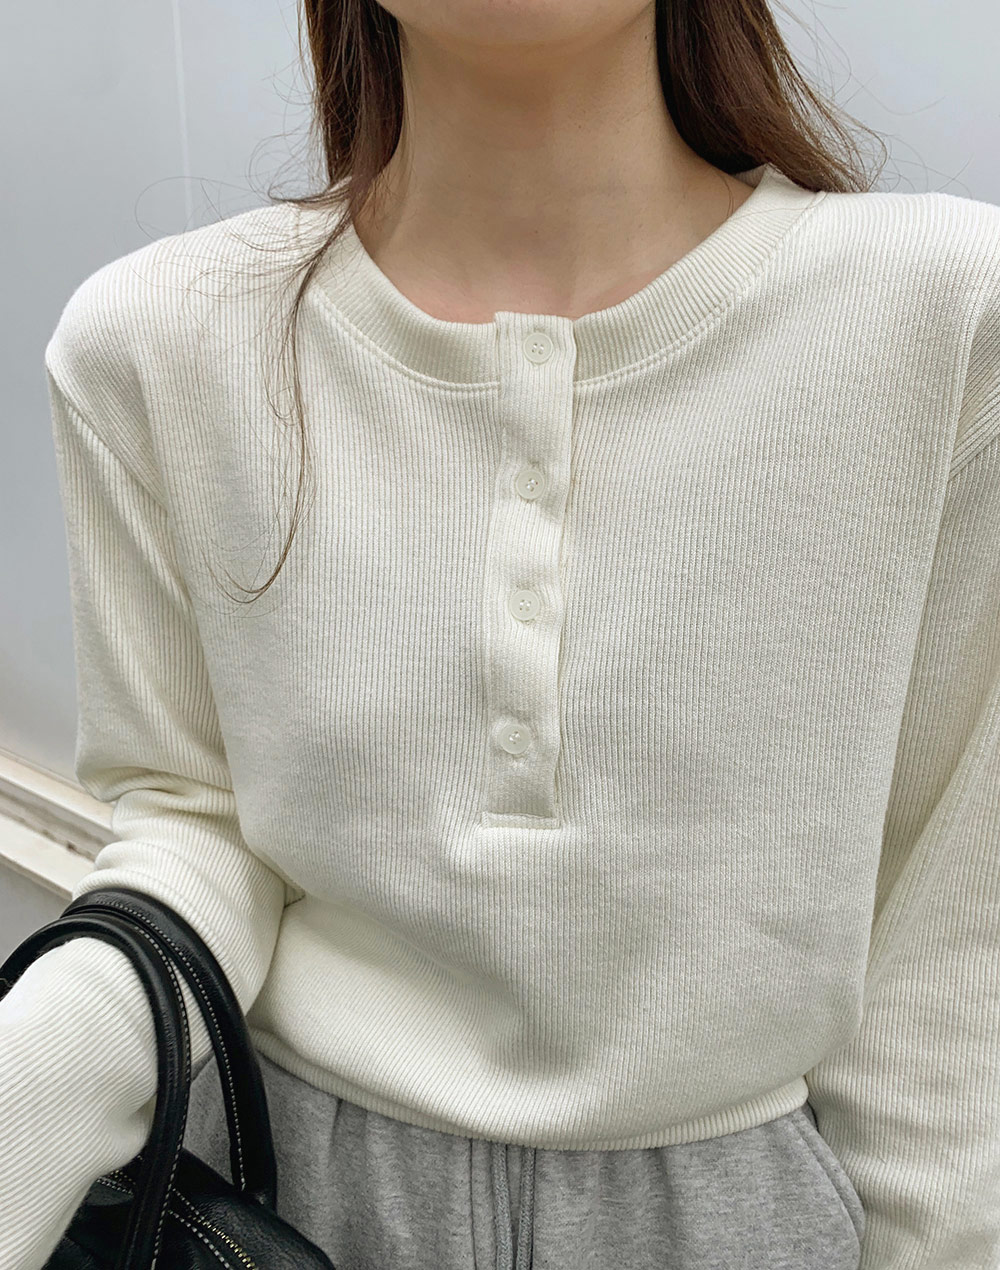 Long sleeve ribbed button up top・p276616（トップス/Tシャツ）| maikooe | 東京ガールズマーケット